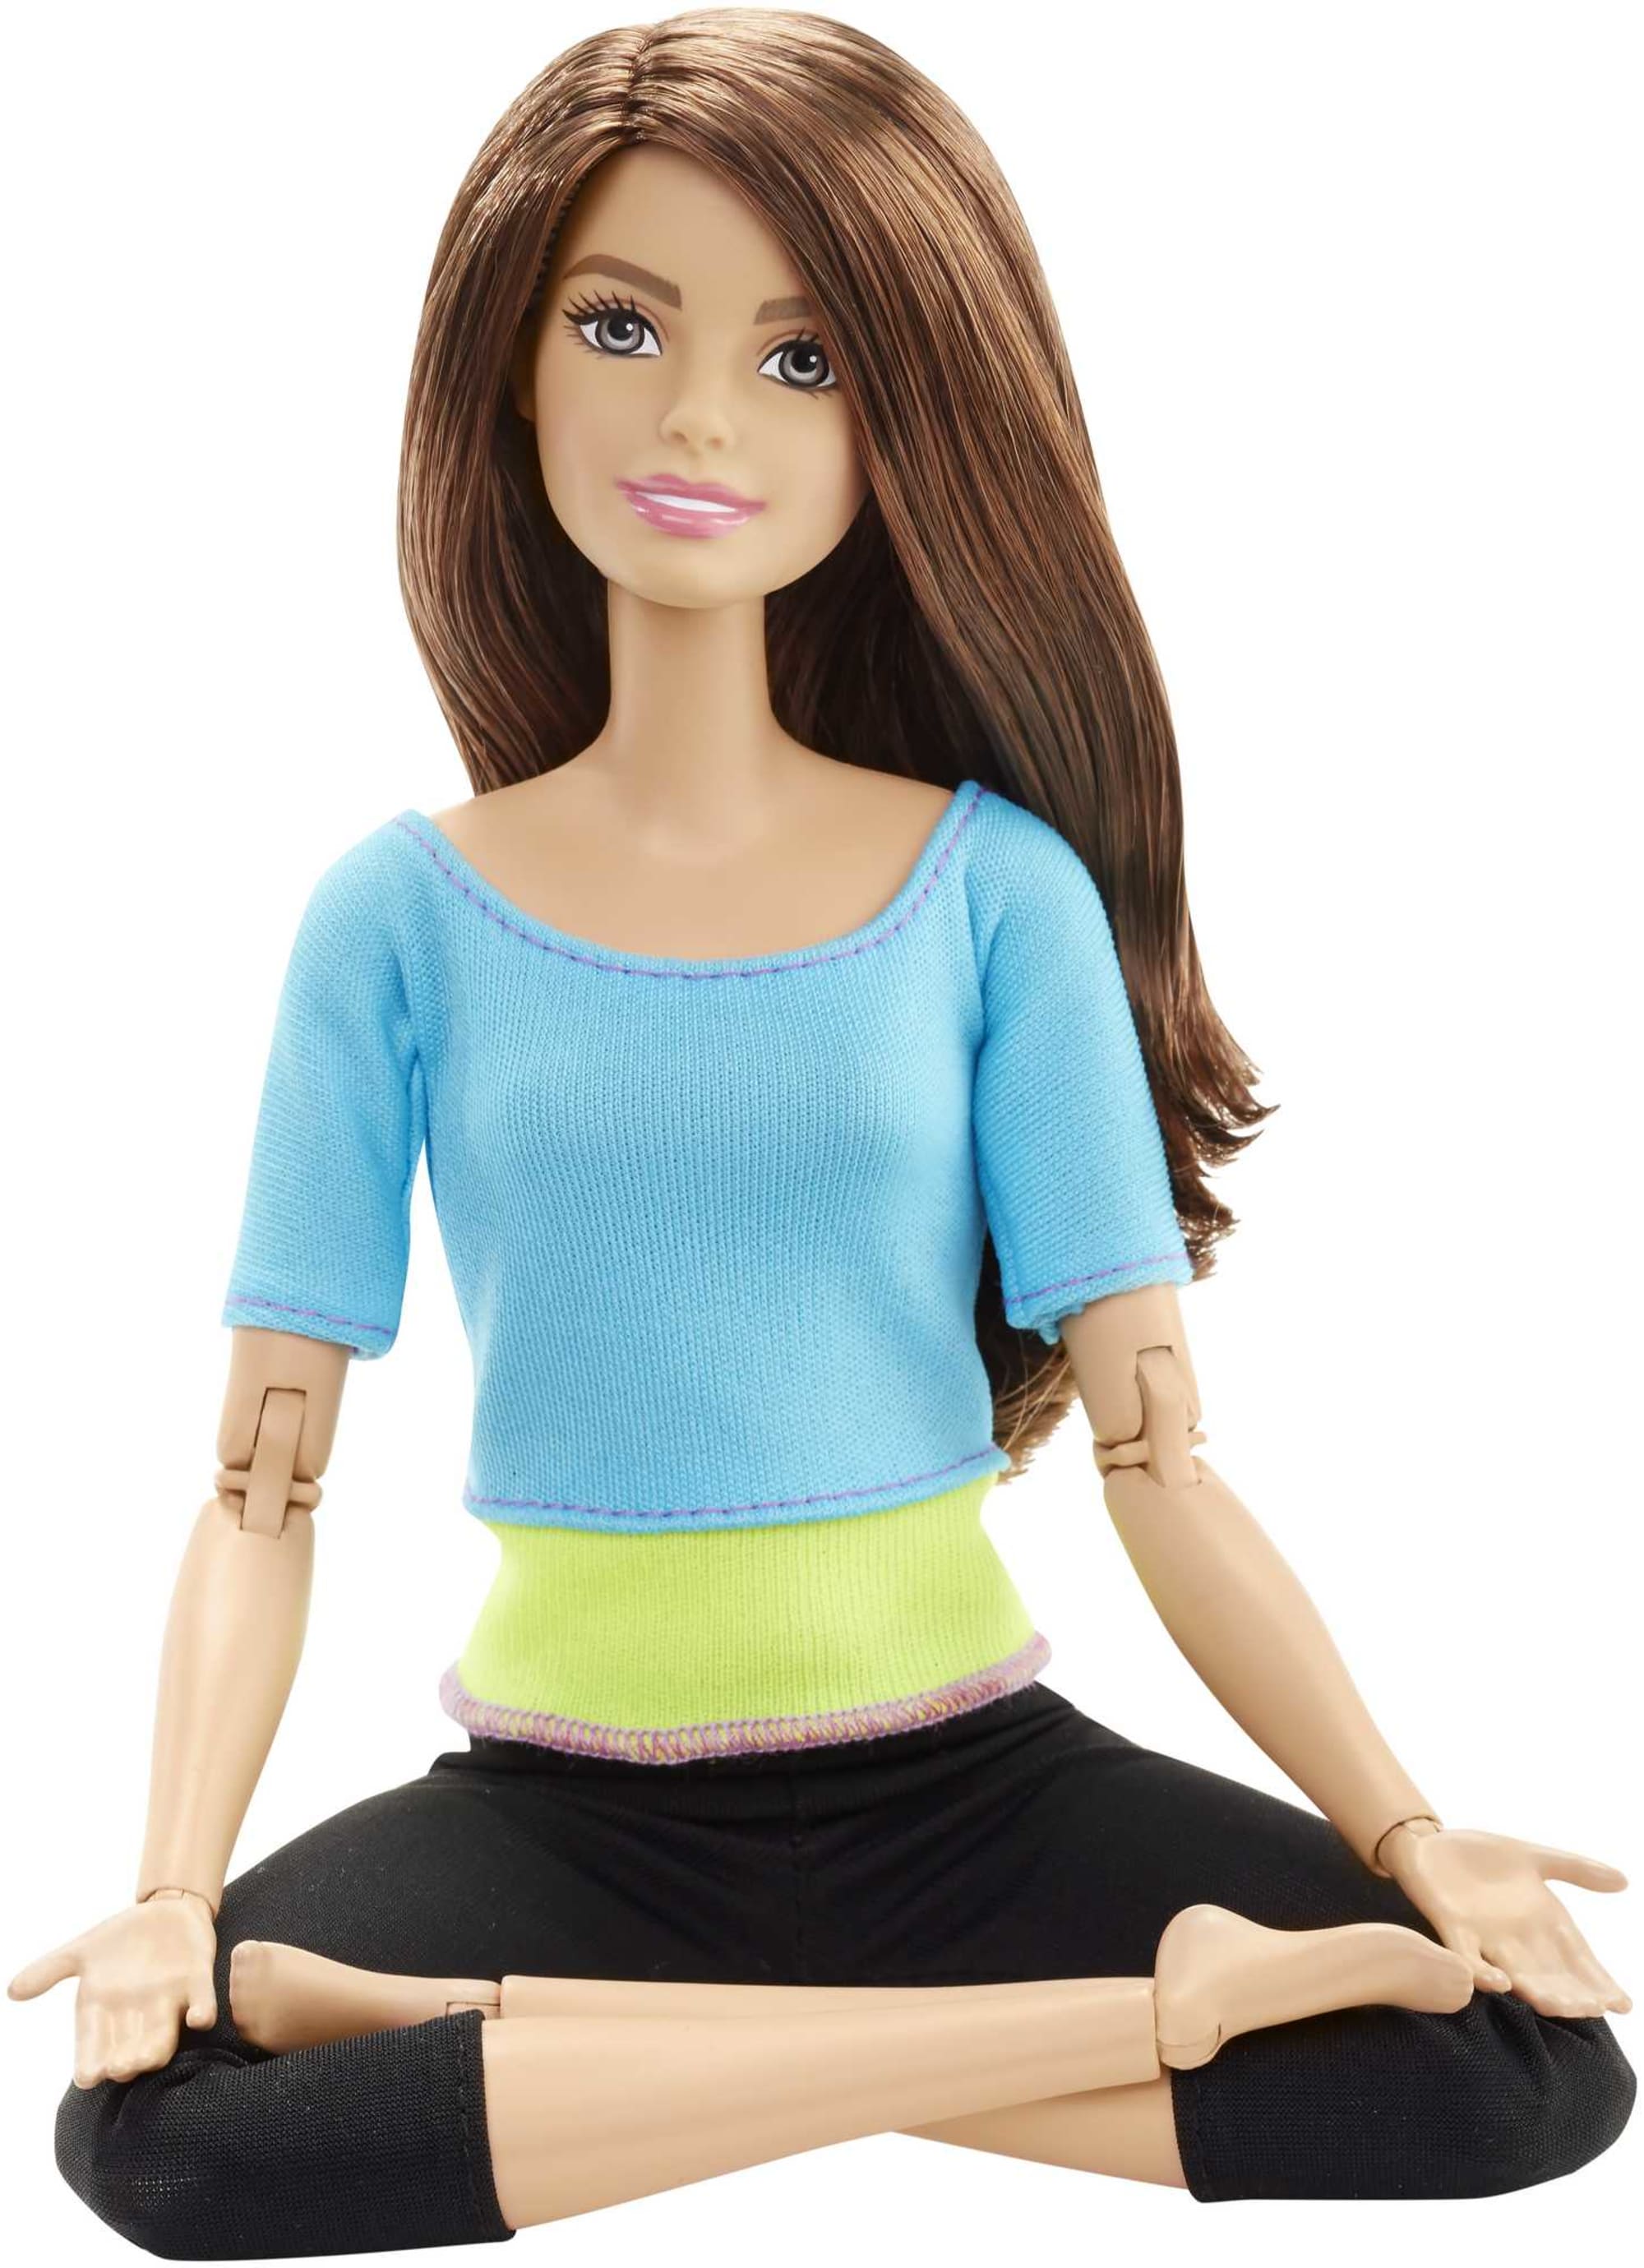  Barbie Made to Move Doll with 22 Joints, Dark Hair